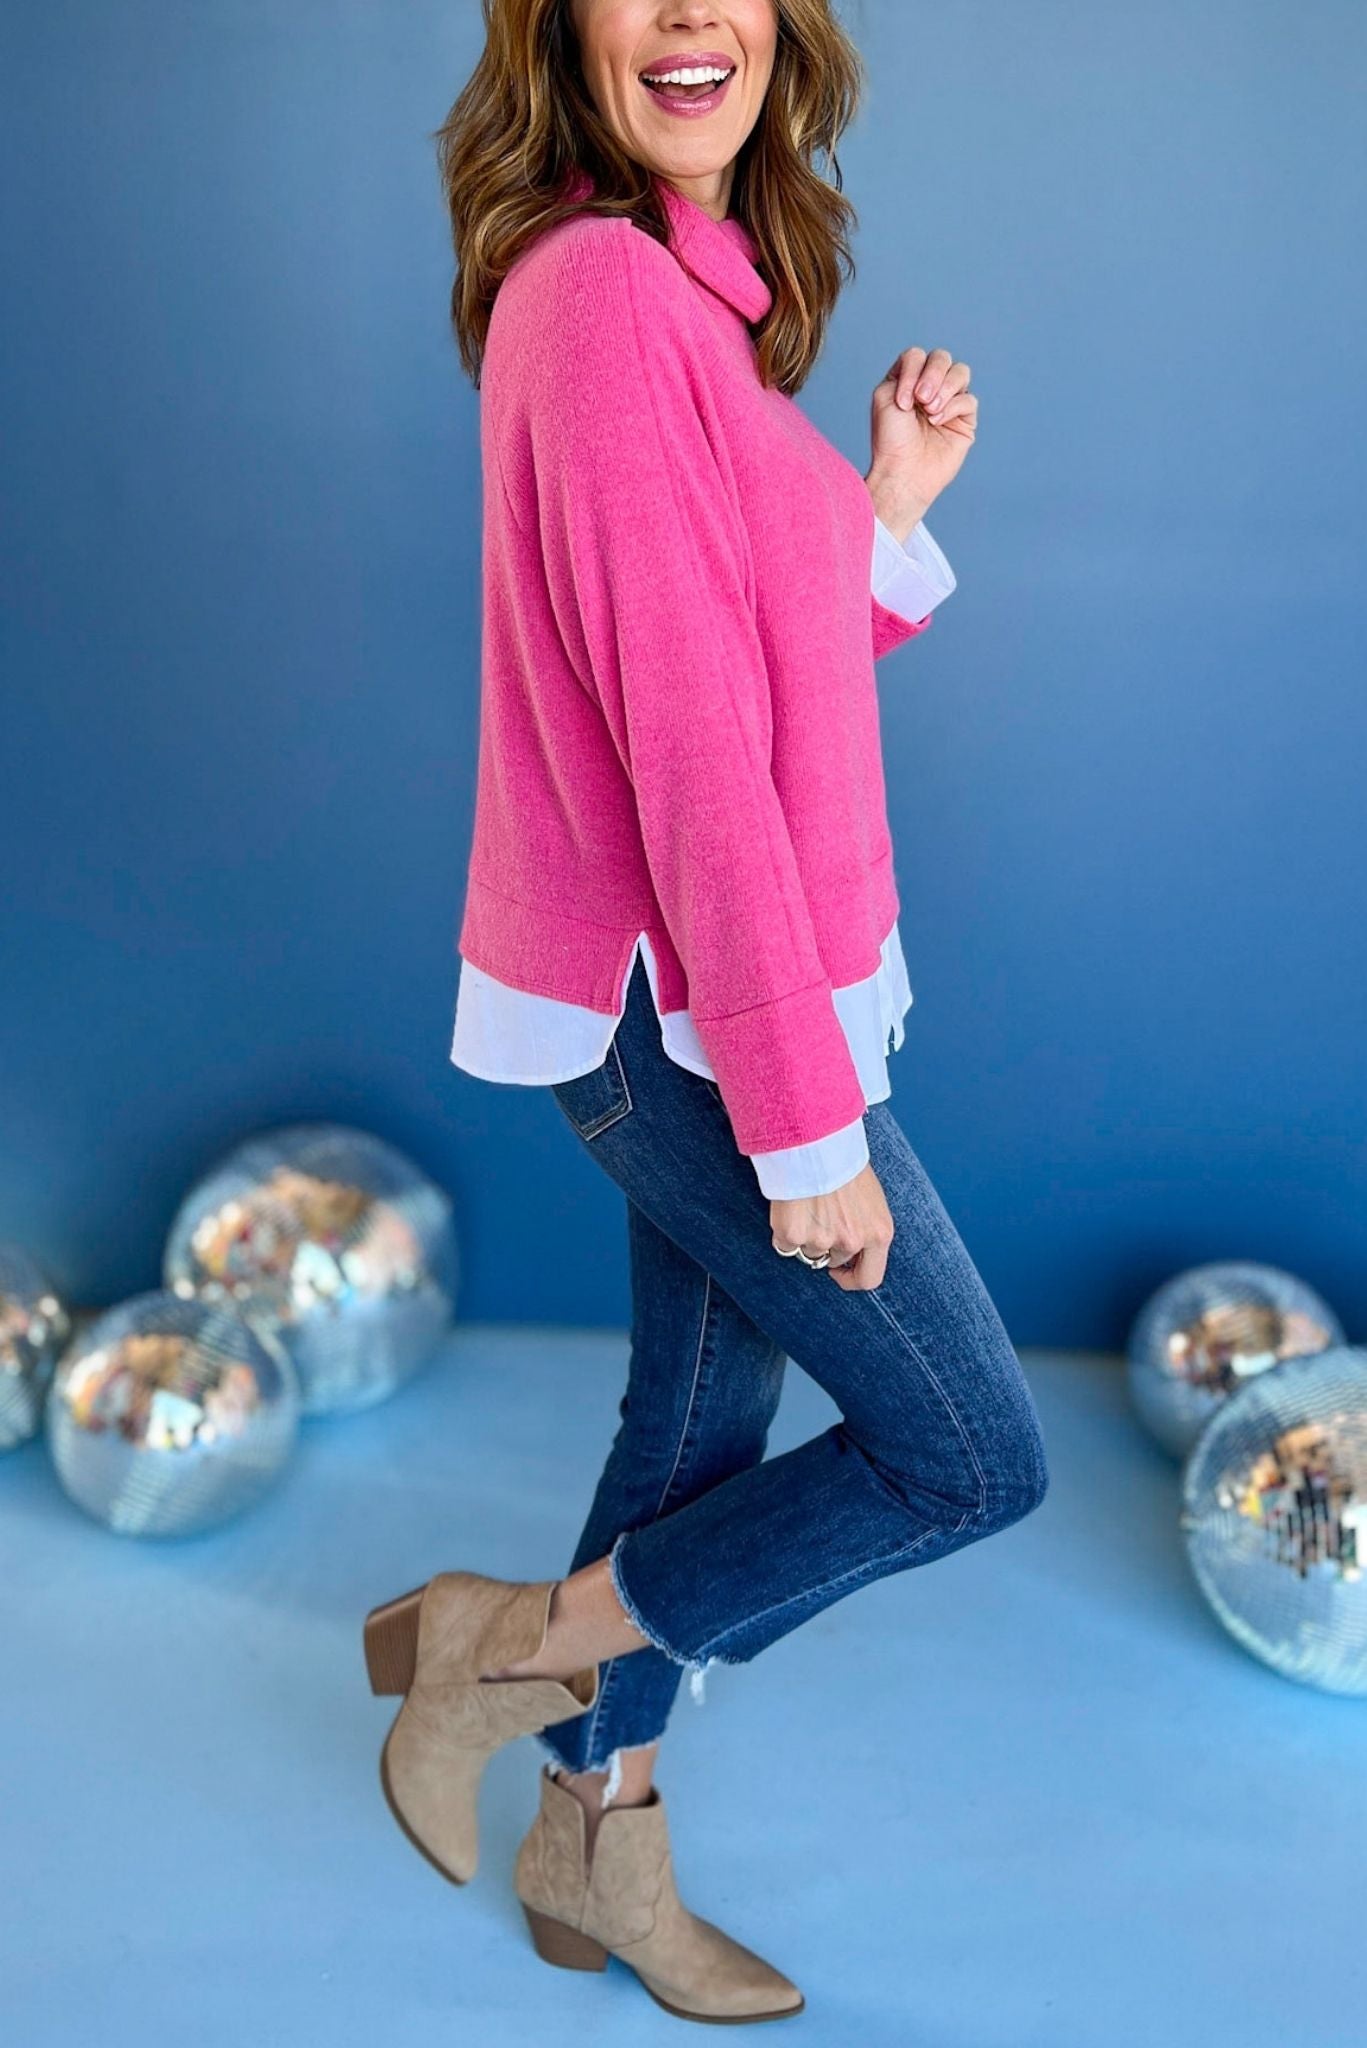 Hot Pink Turtle Neck Contrast Layered Top, must have top, must have style, winter style, winter fashion, elevated style, elevated top, mom style, winter top, shop style your senses by mallory fitzsimmons